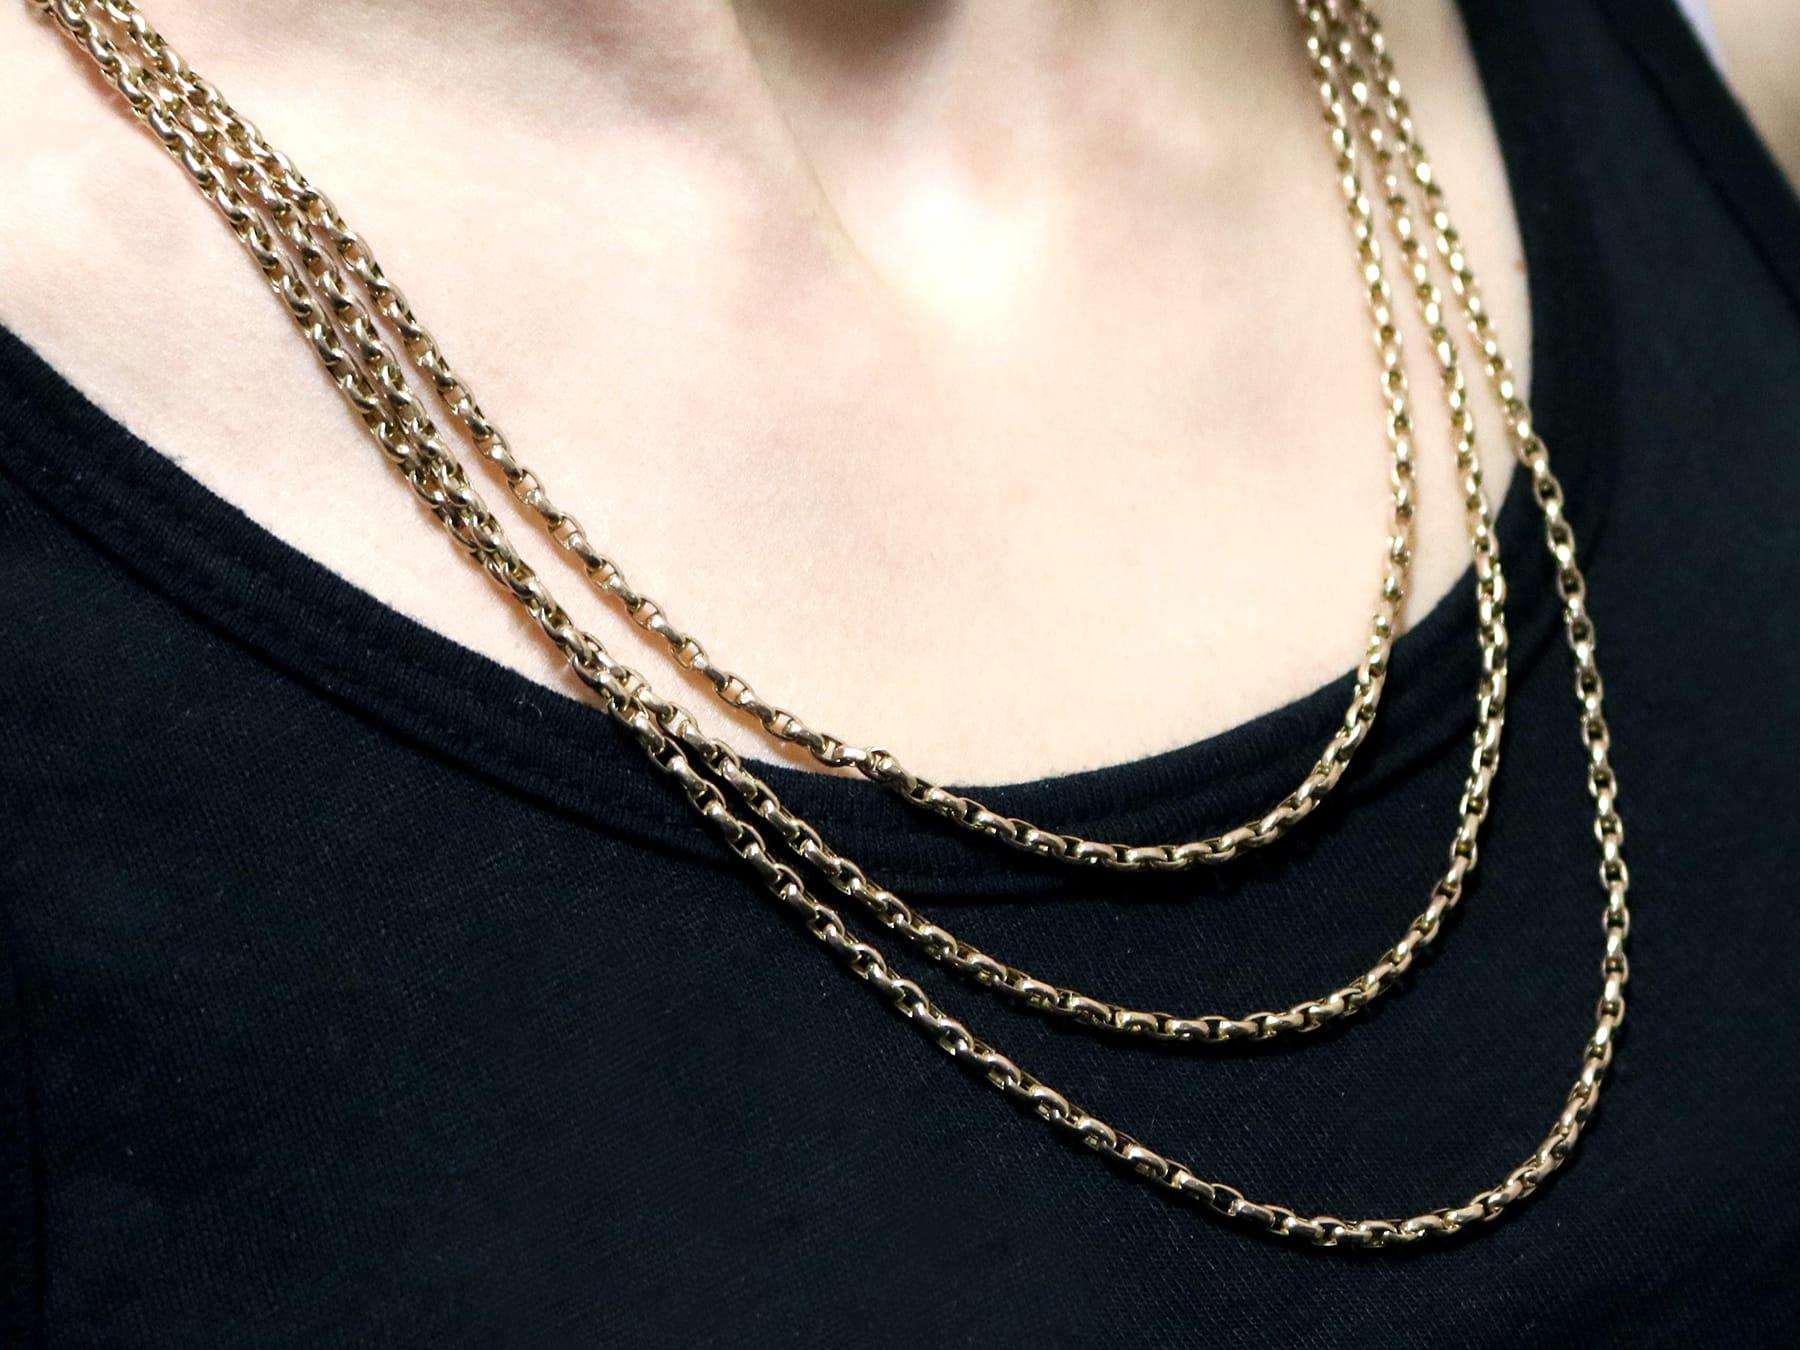 Antique 9k Yellow Gold Longuard Chain Necklace Circa 1900 For Sale 4